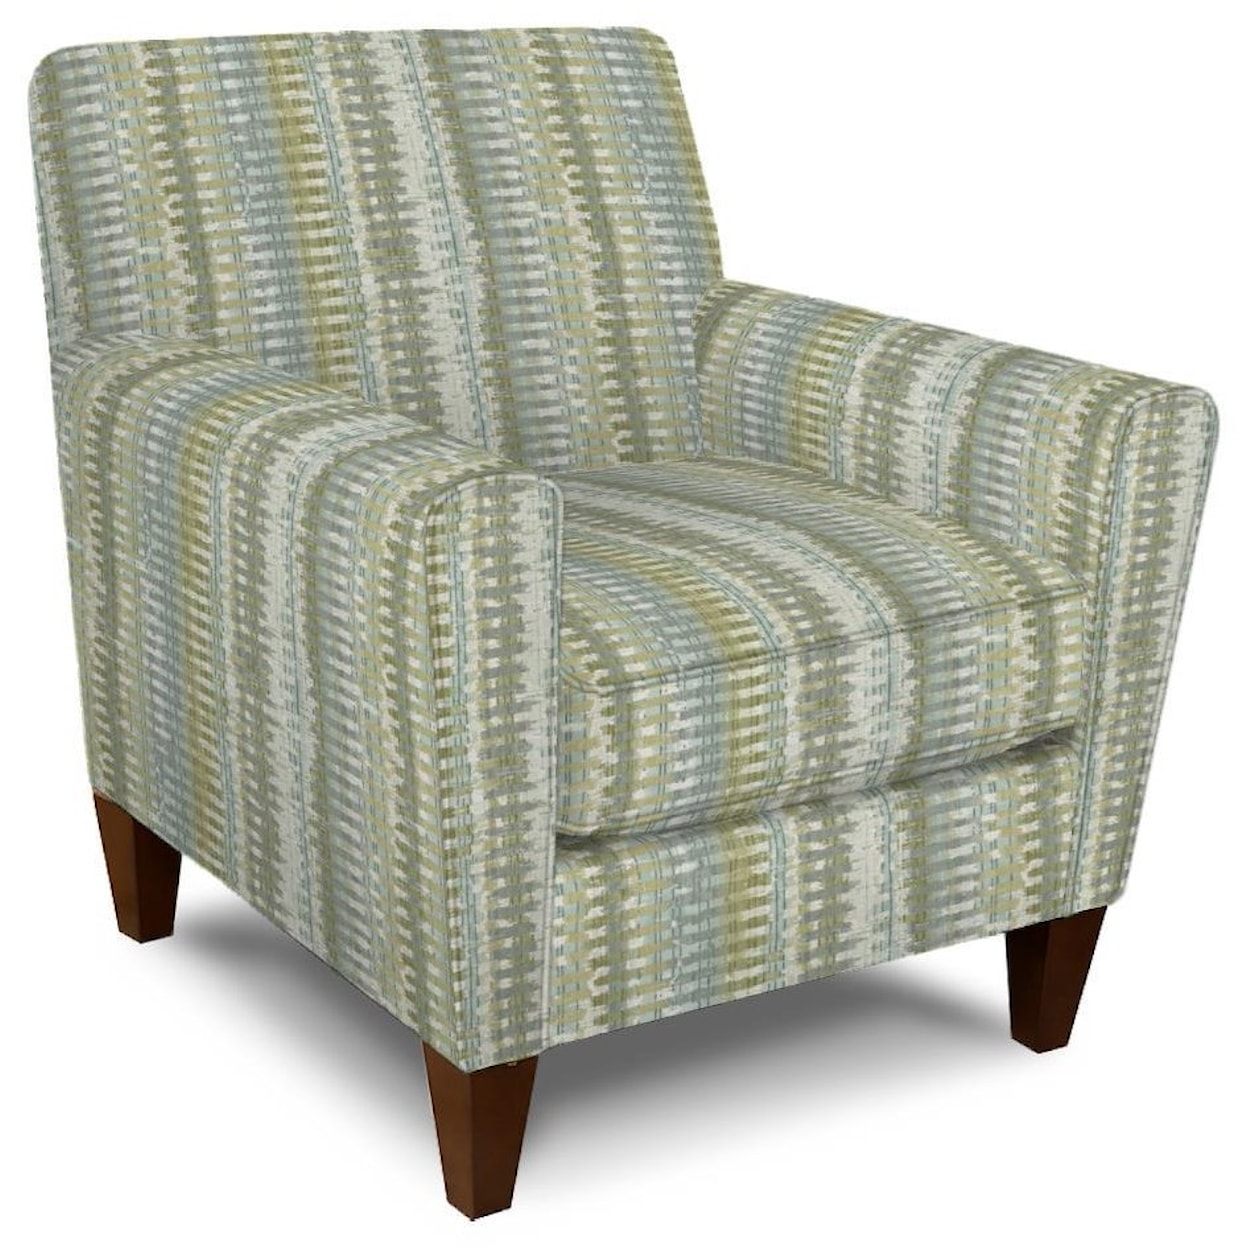 England 6200/LS Series Upholstered Chair